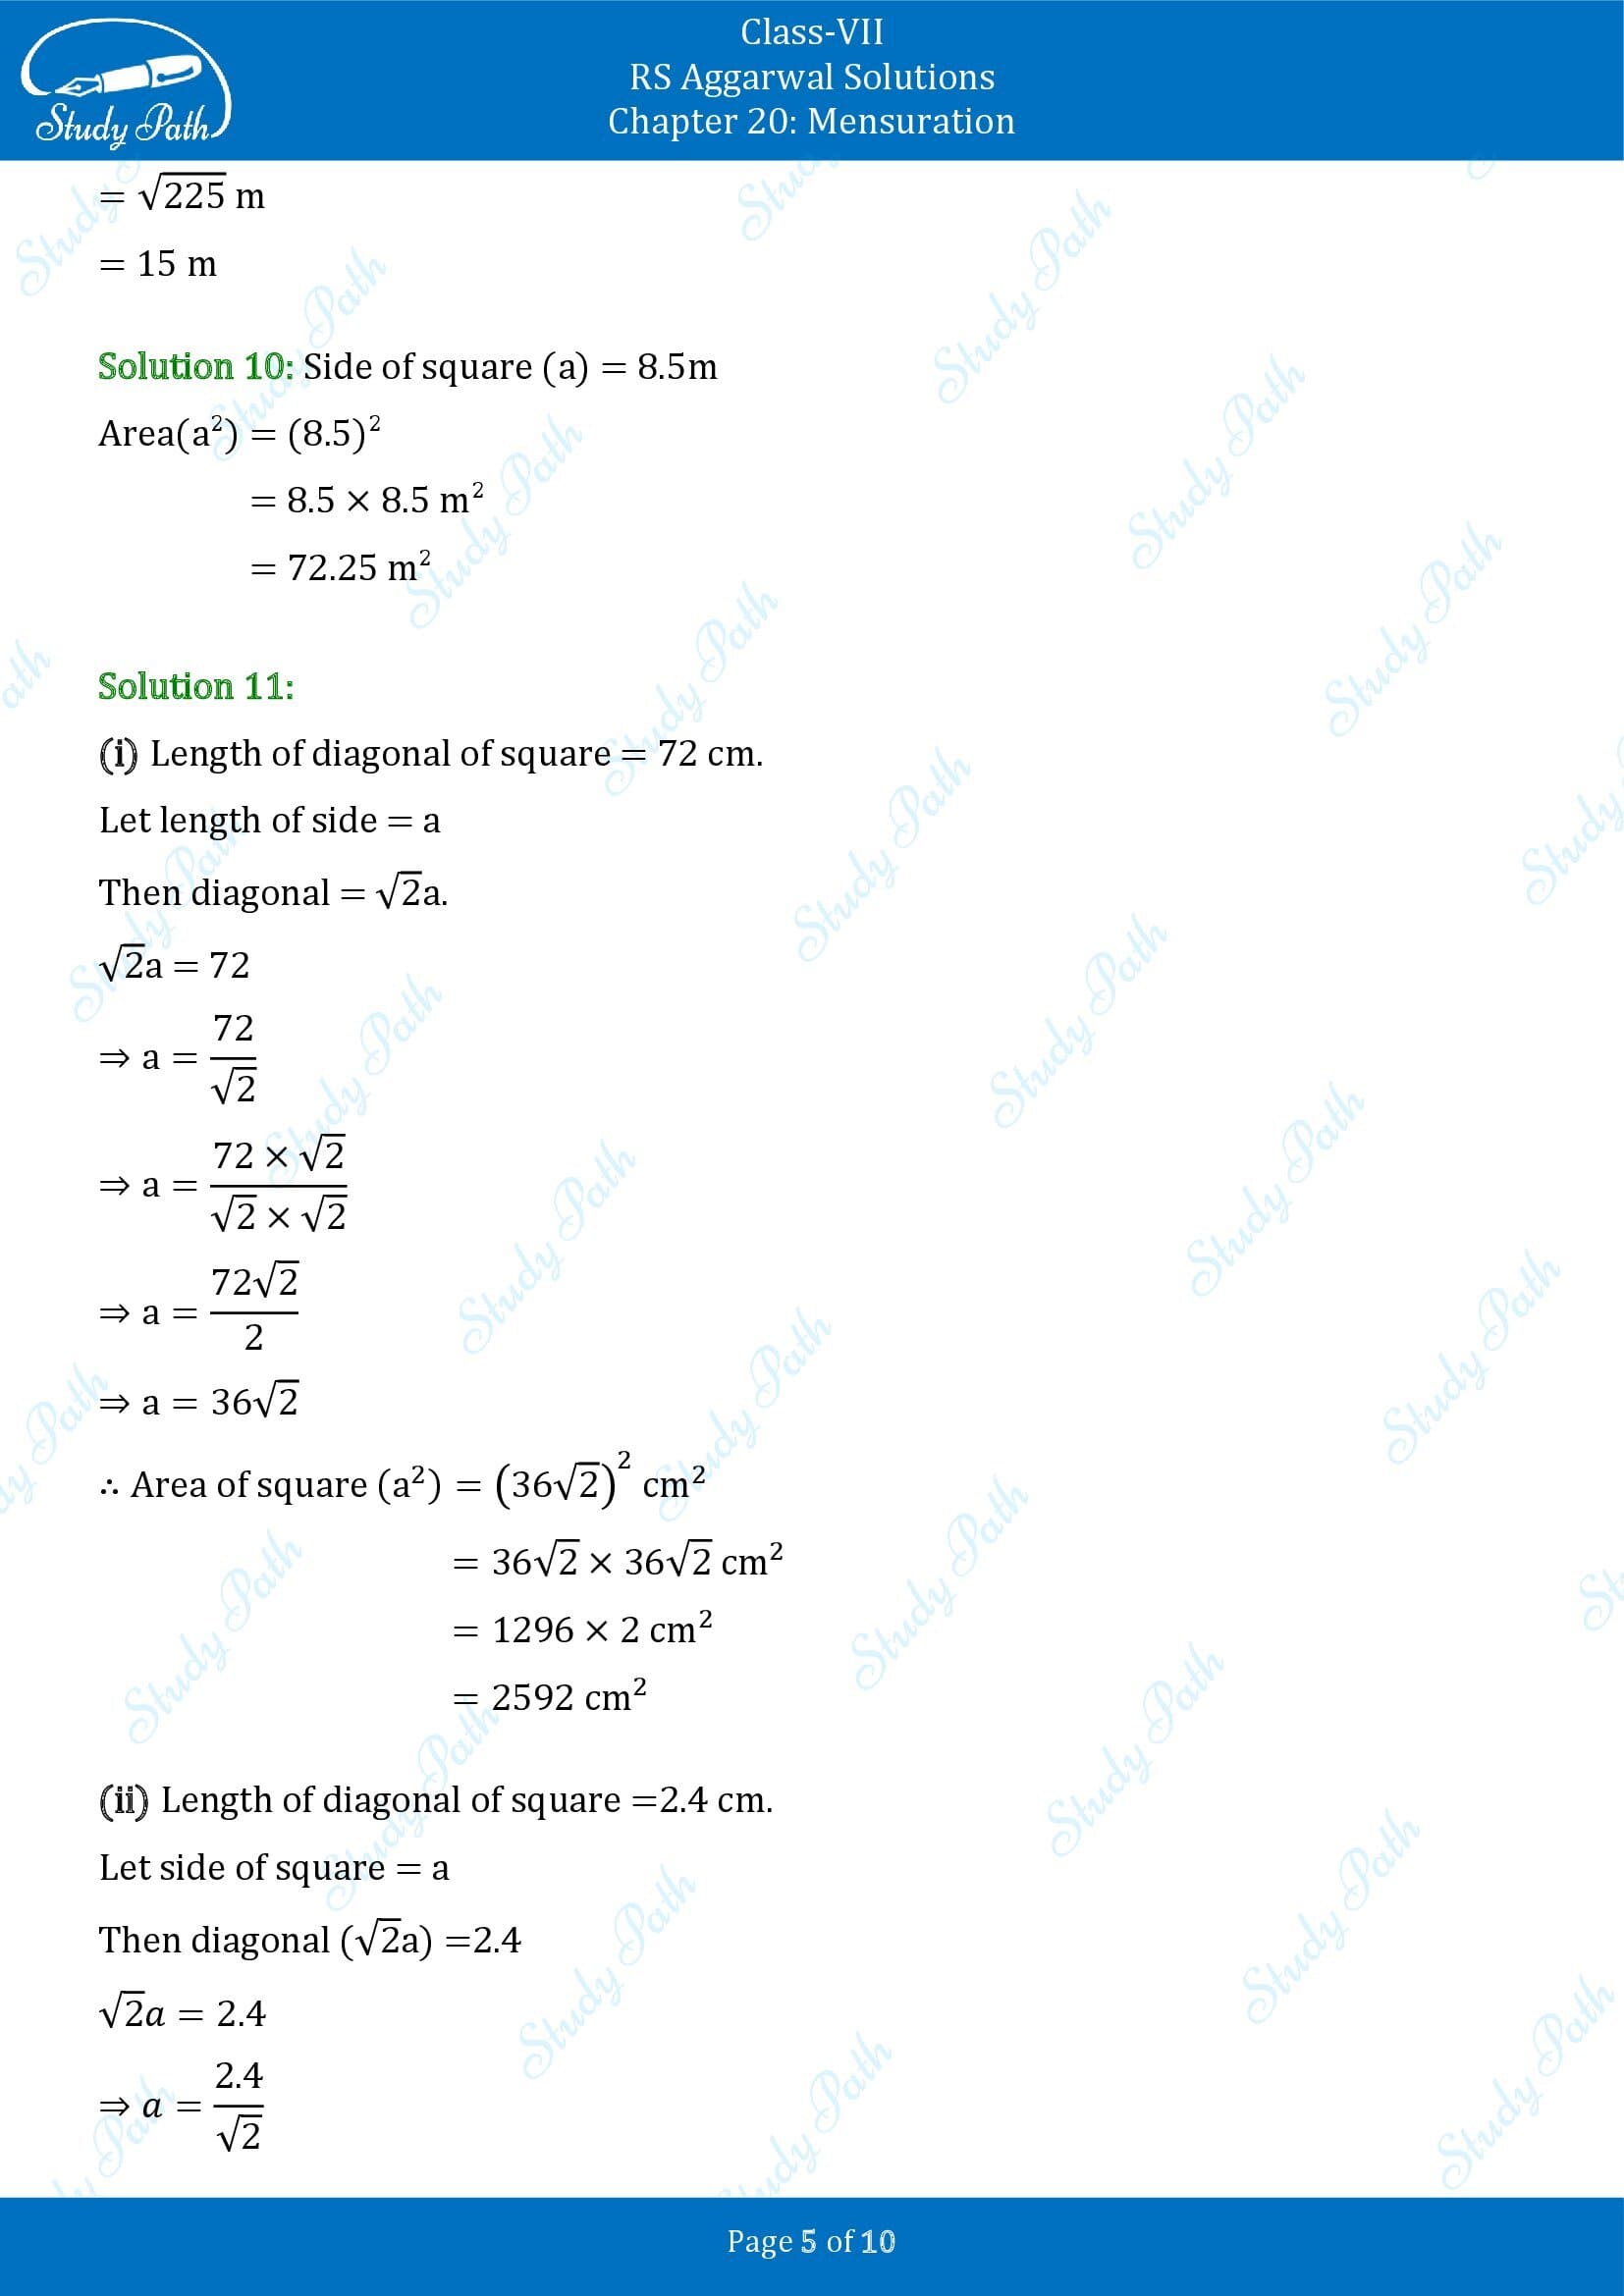 RS Aggarwal Solutions Class 7 Chapter 20 Mensuration Exercise 20A 00005